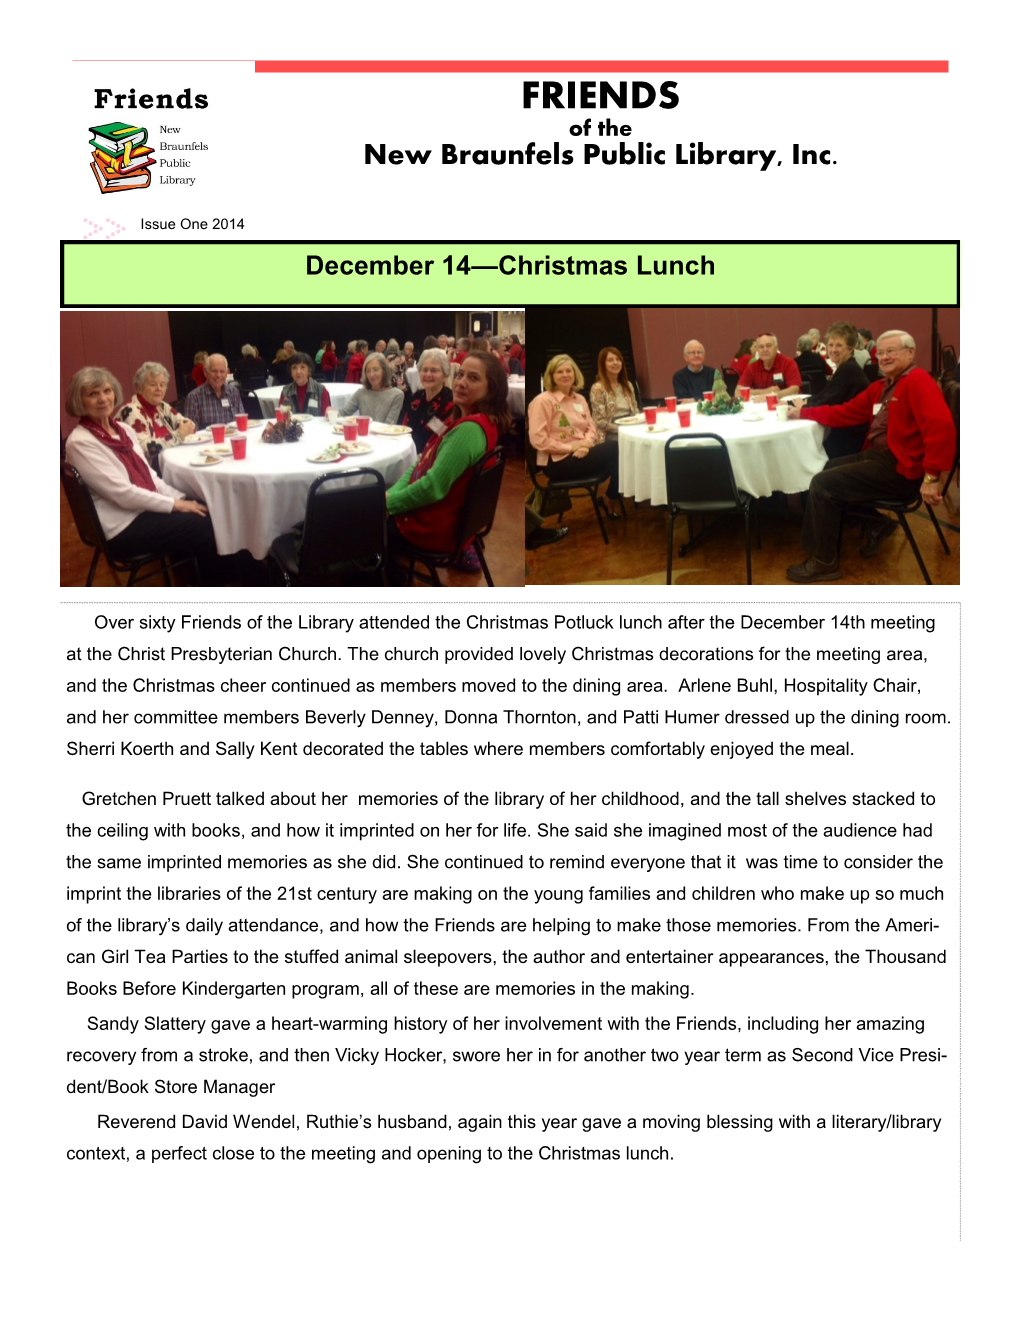 FRIENDS of the New Braunfels Public Library, Inc